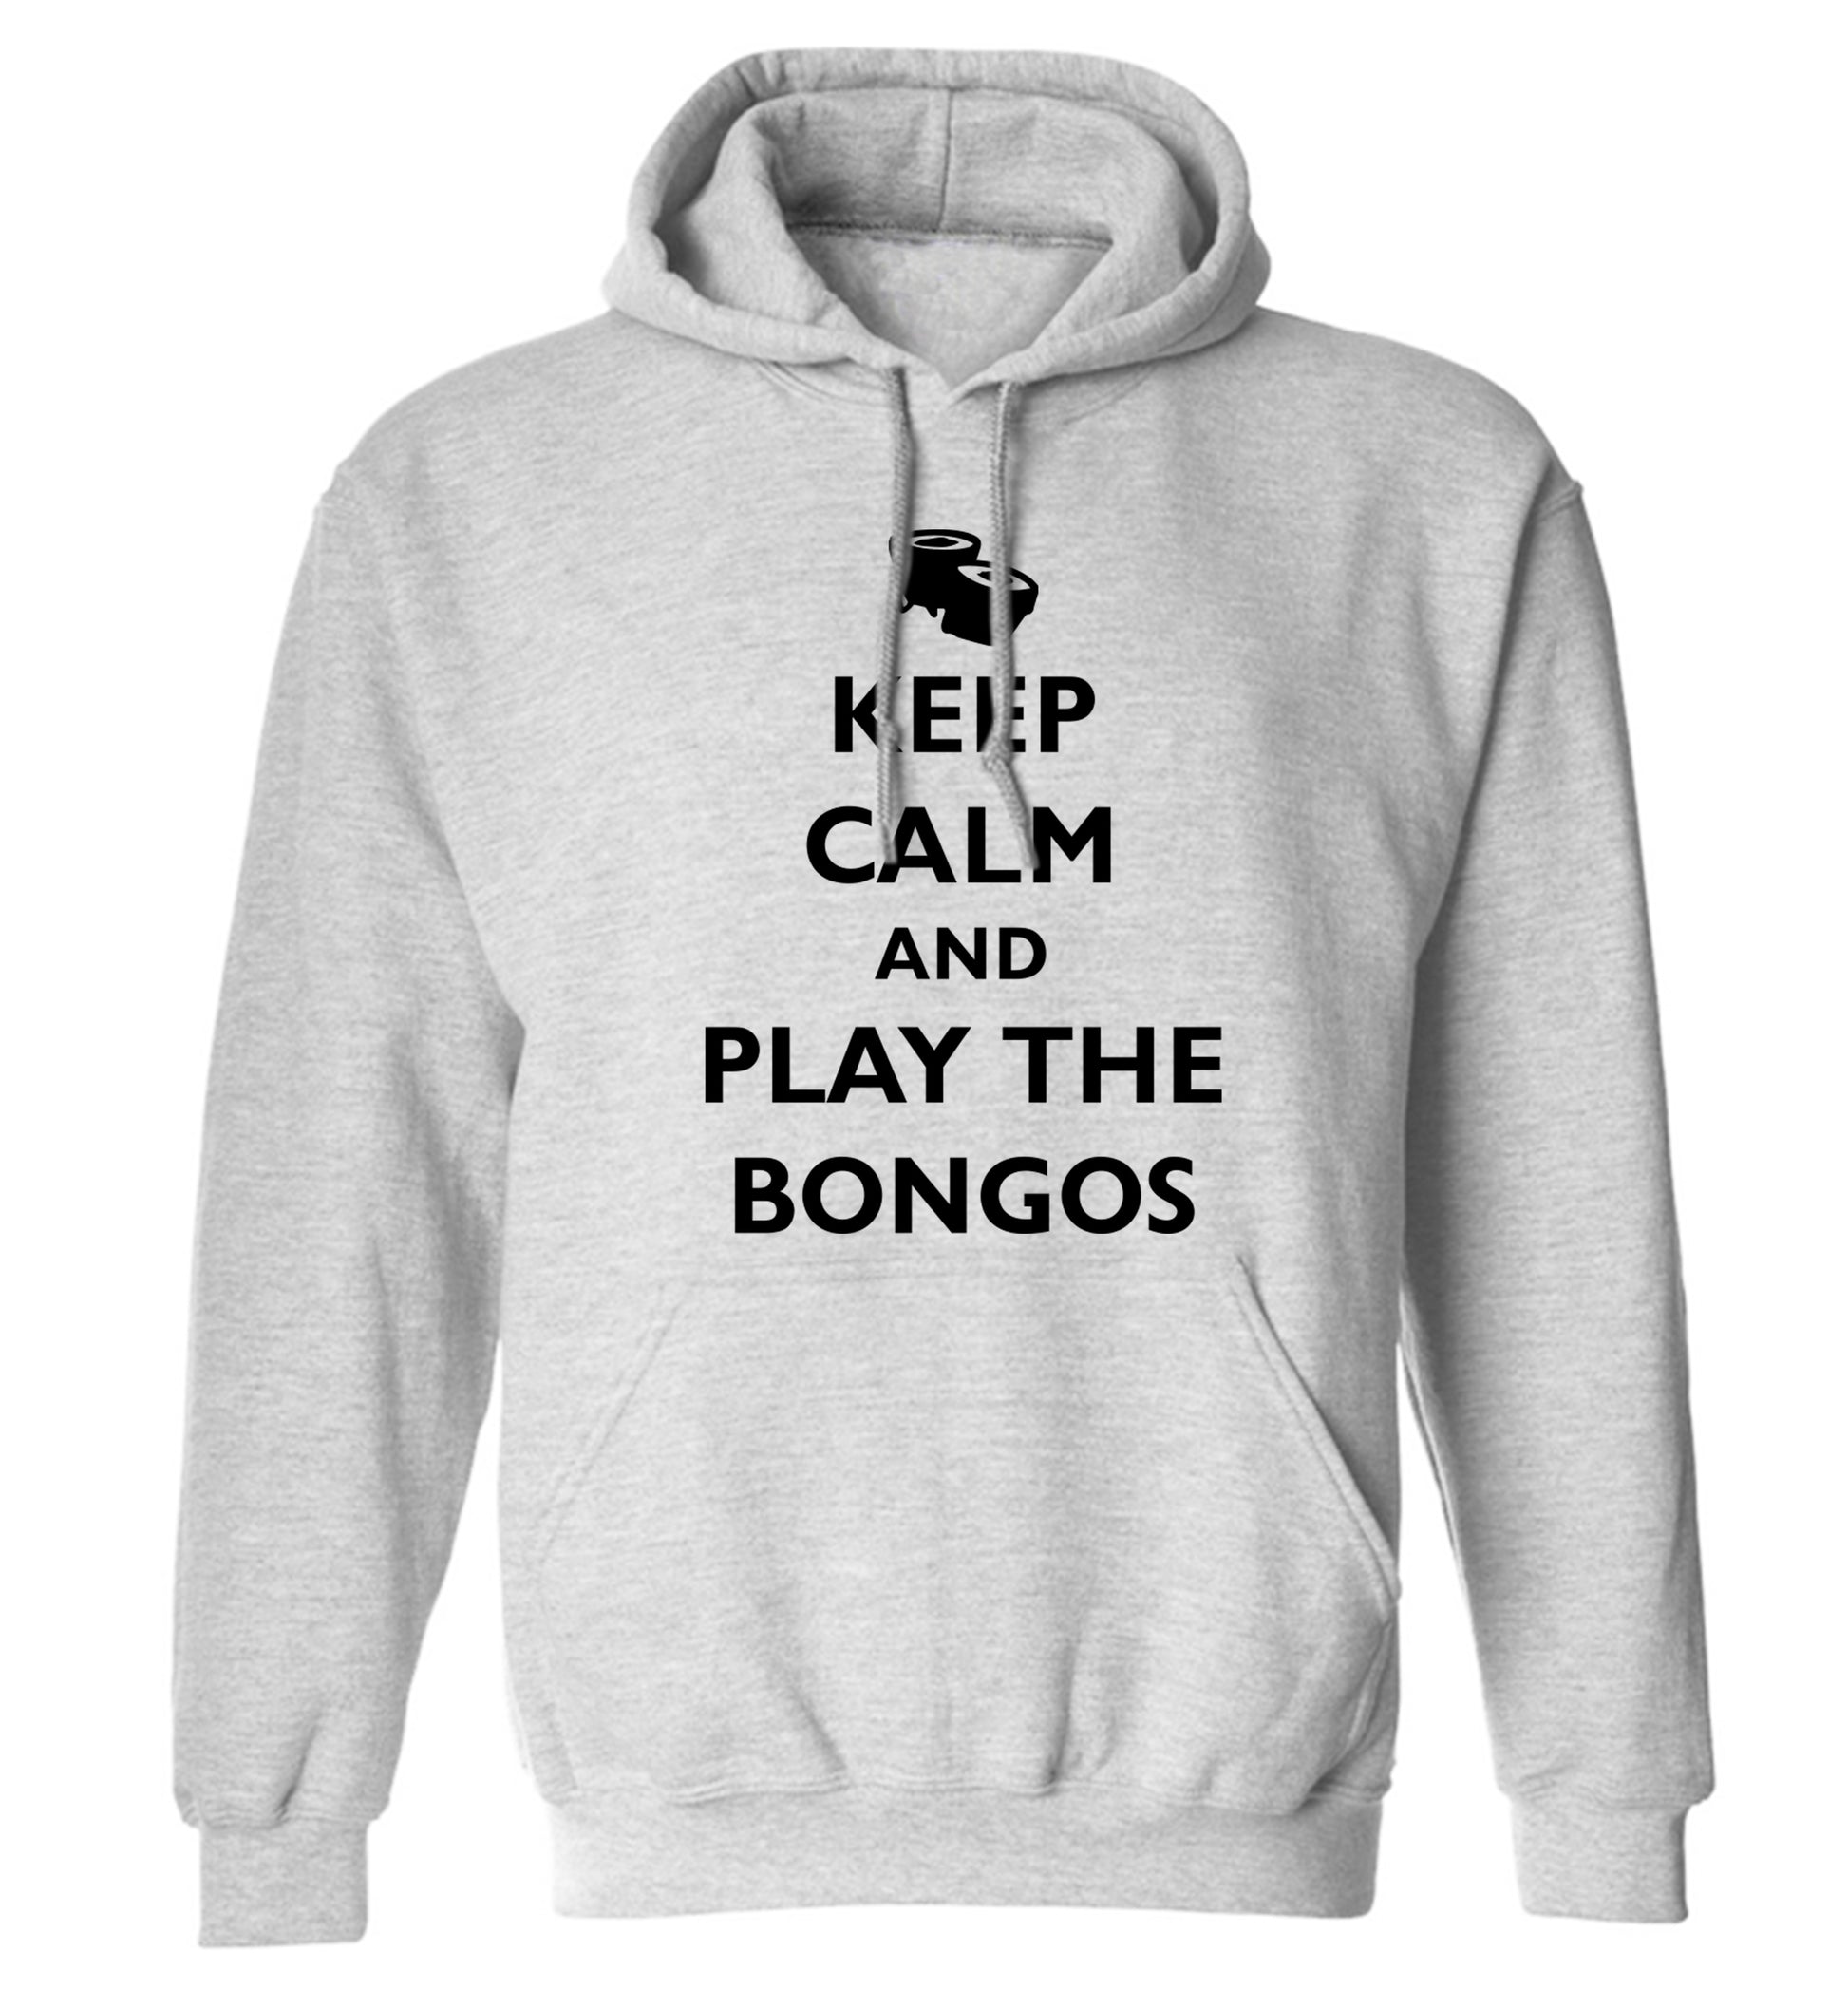 Keep calm and play the bongos adults unisex grey hoodie 2XL